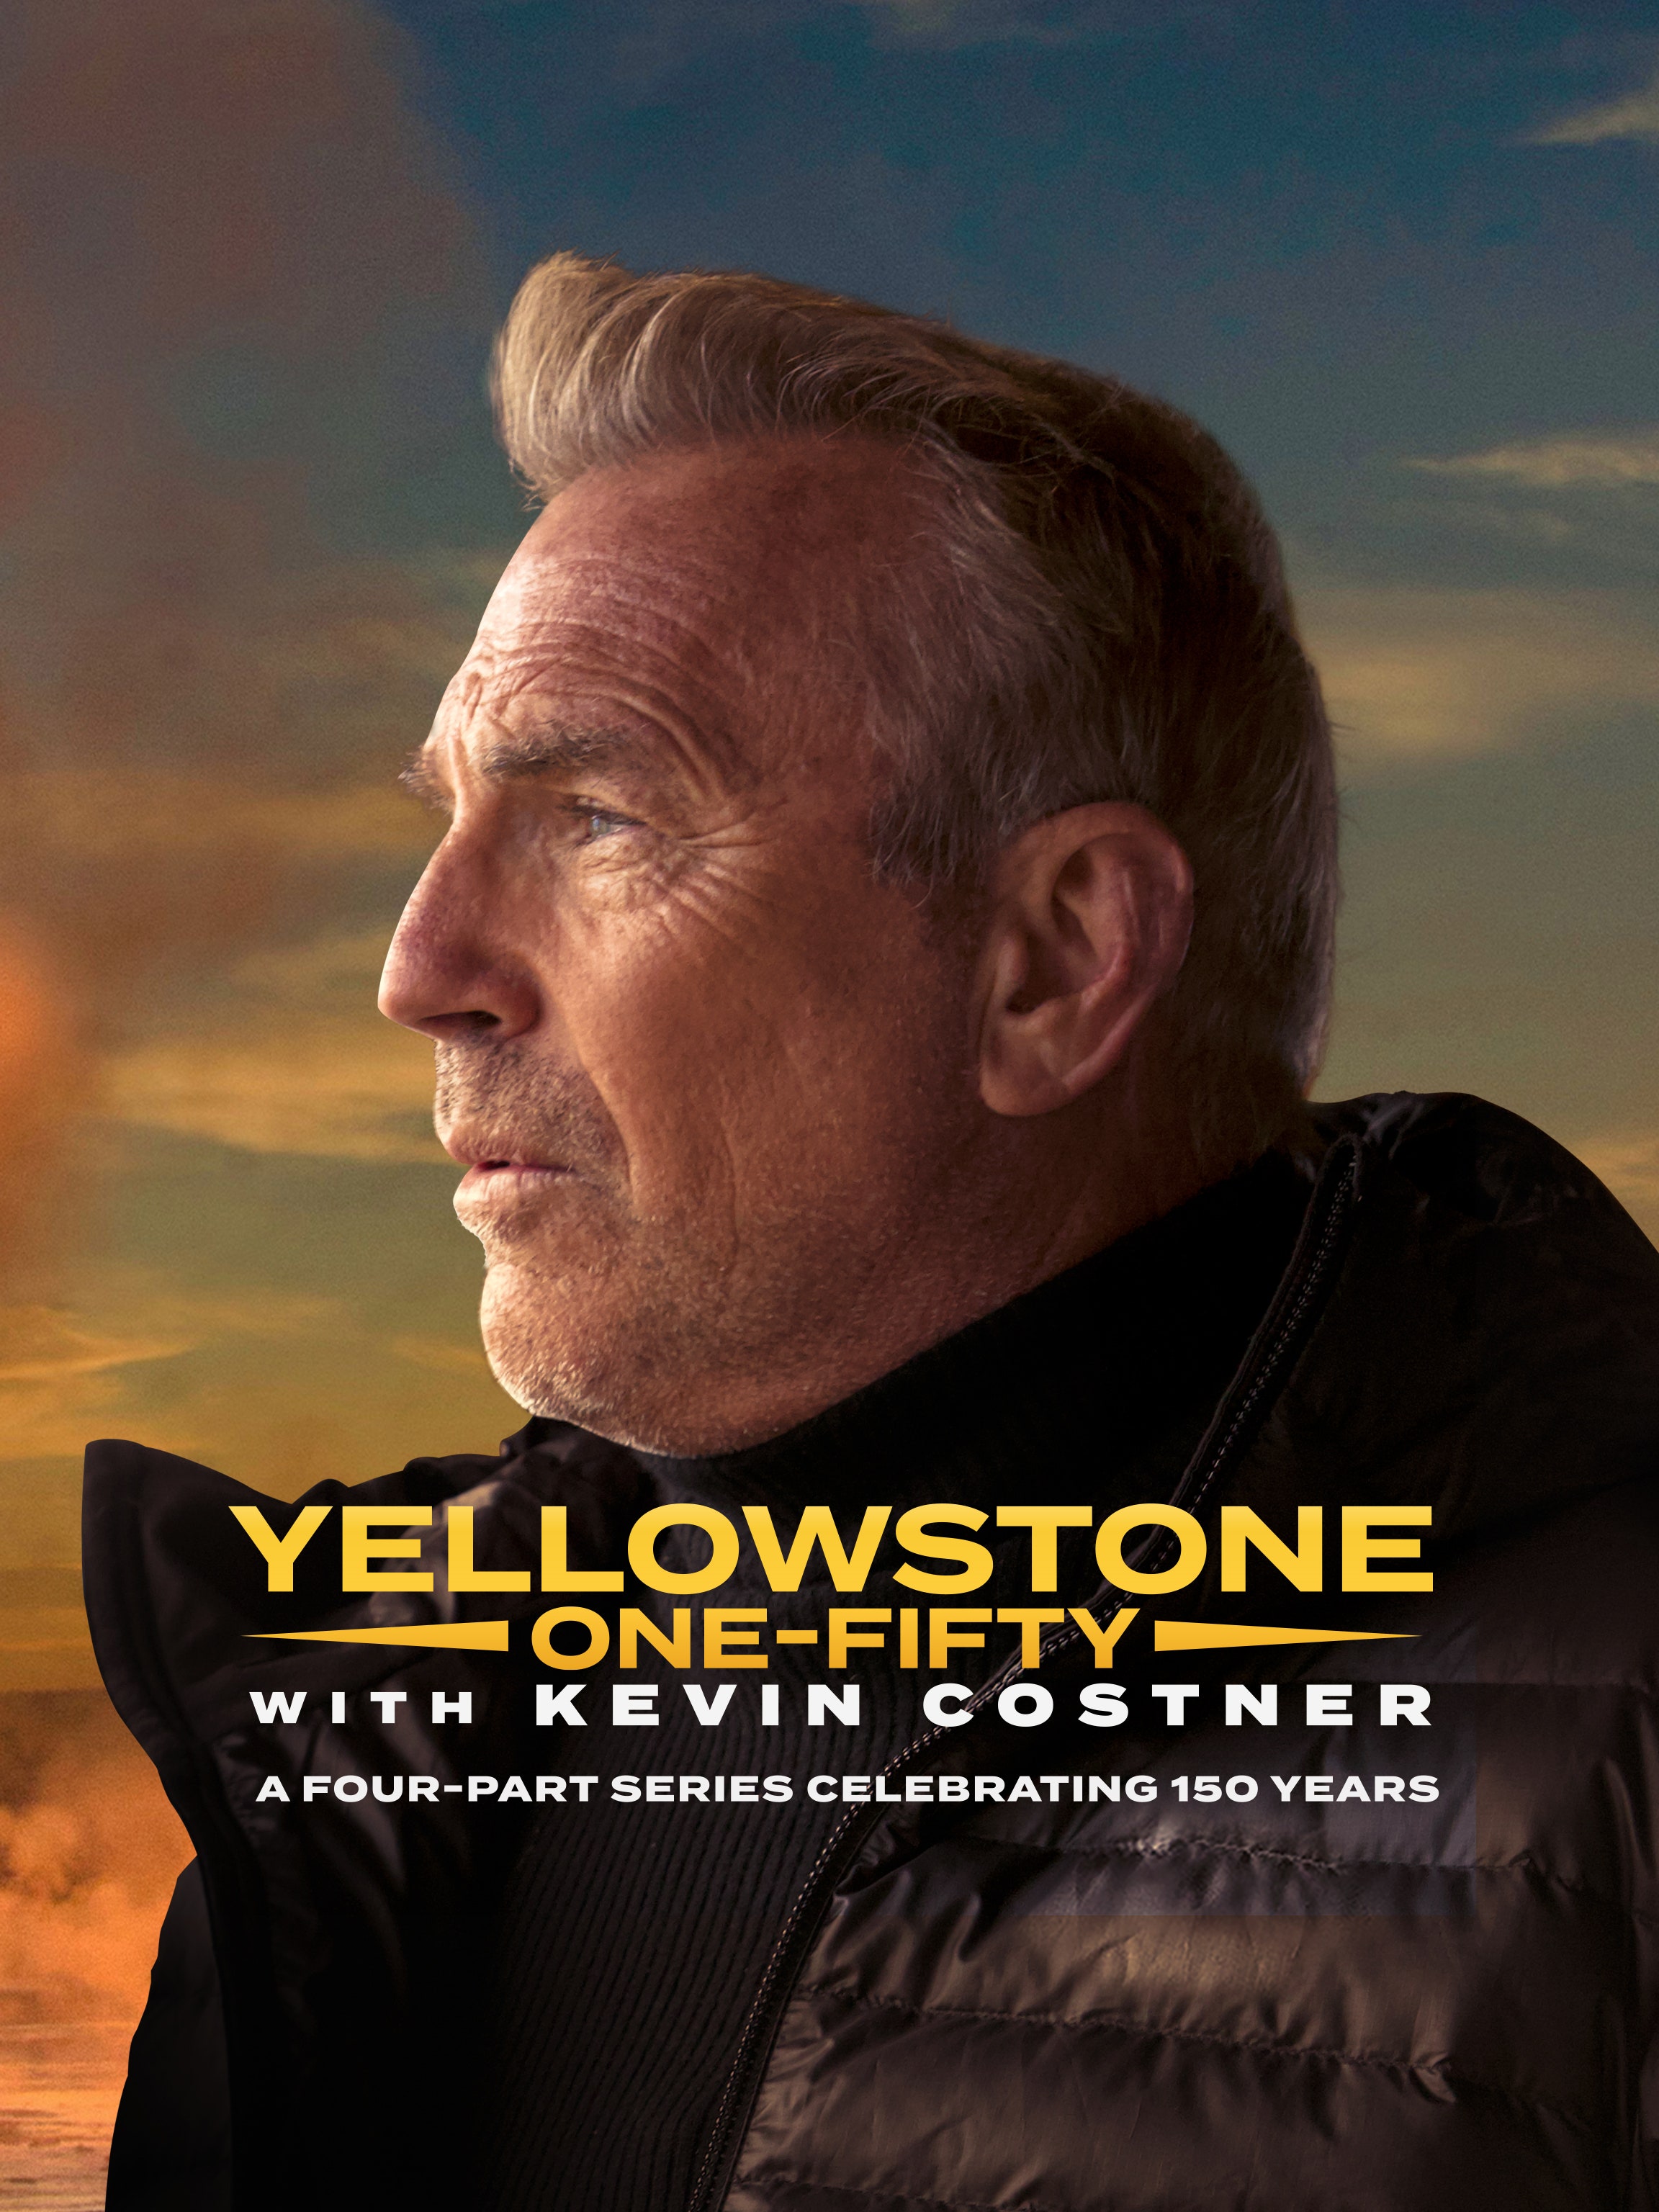 Yellowstone One-Fifty dcg-mark-poster